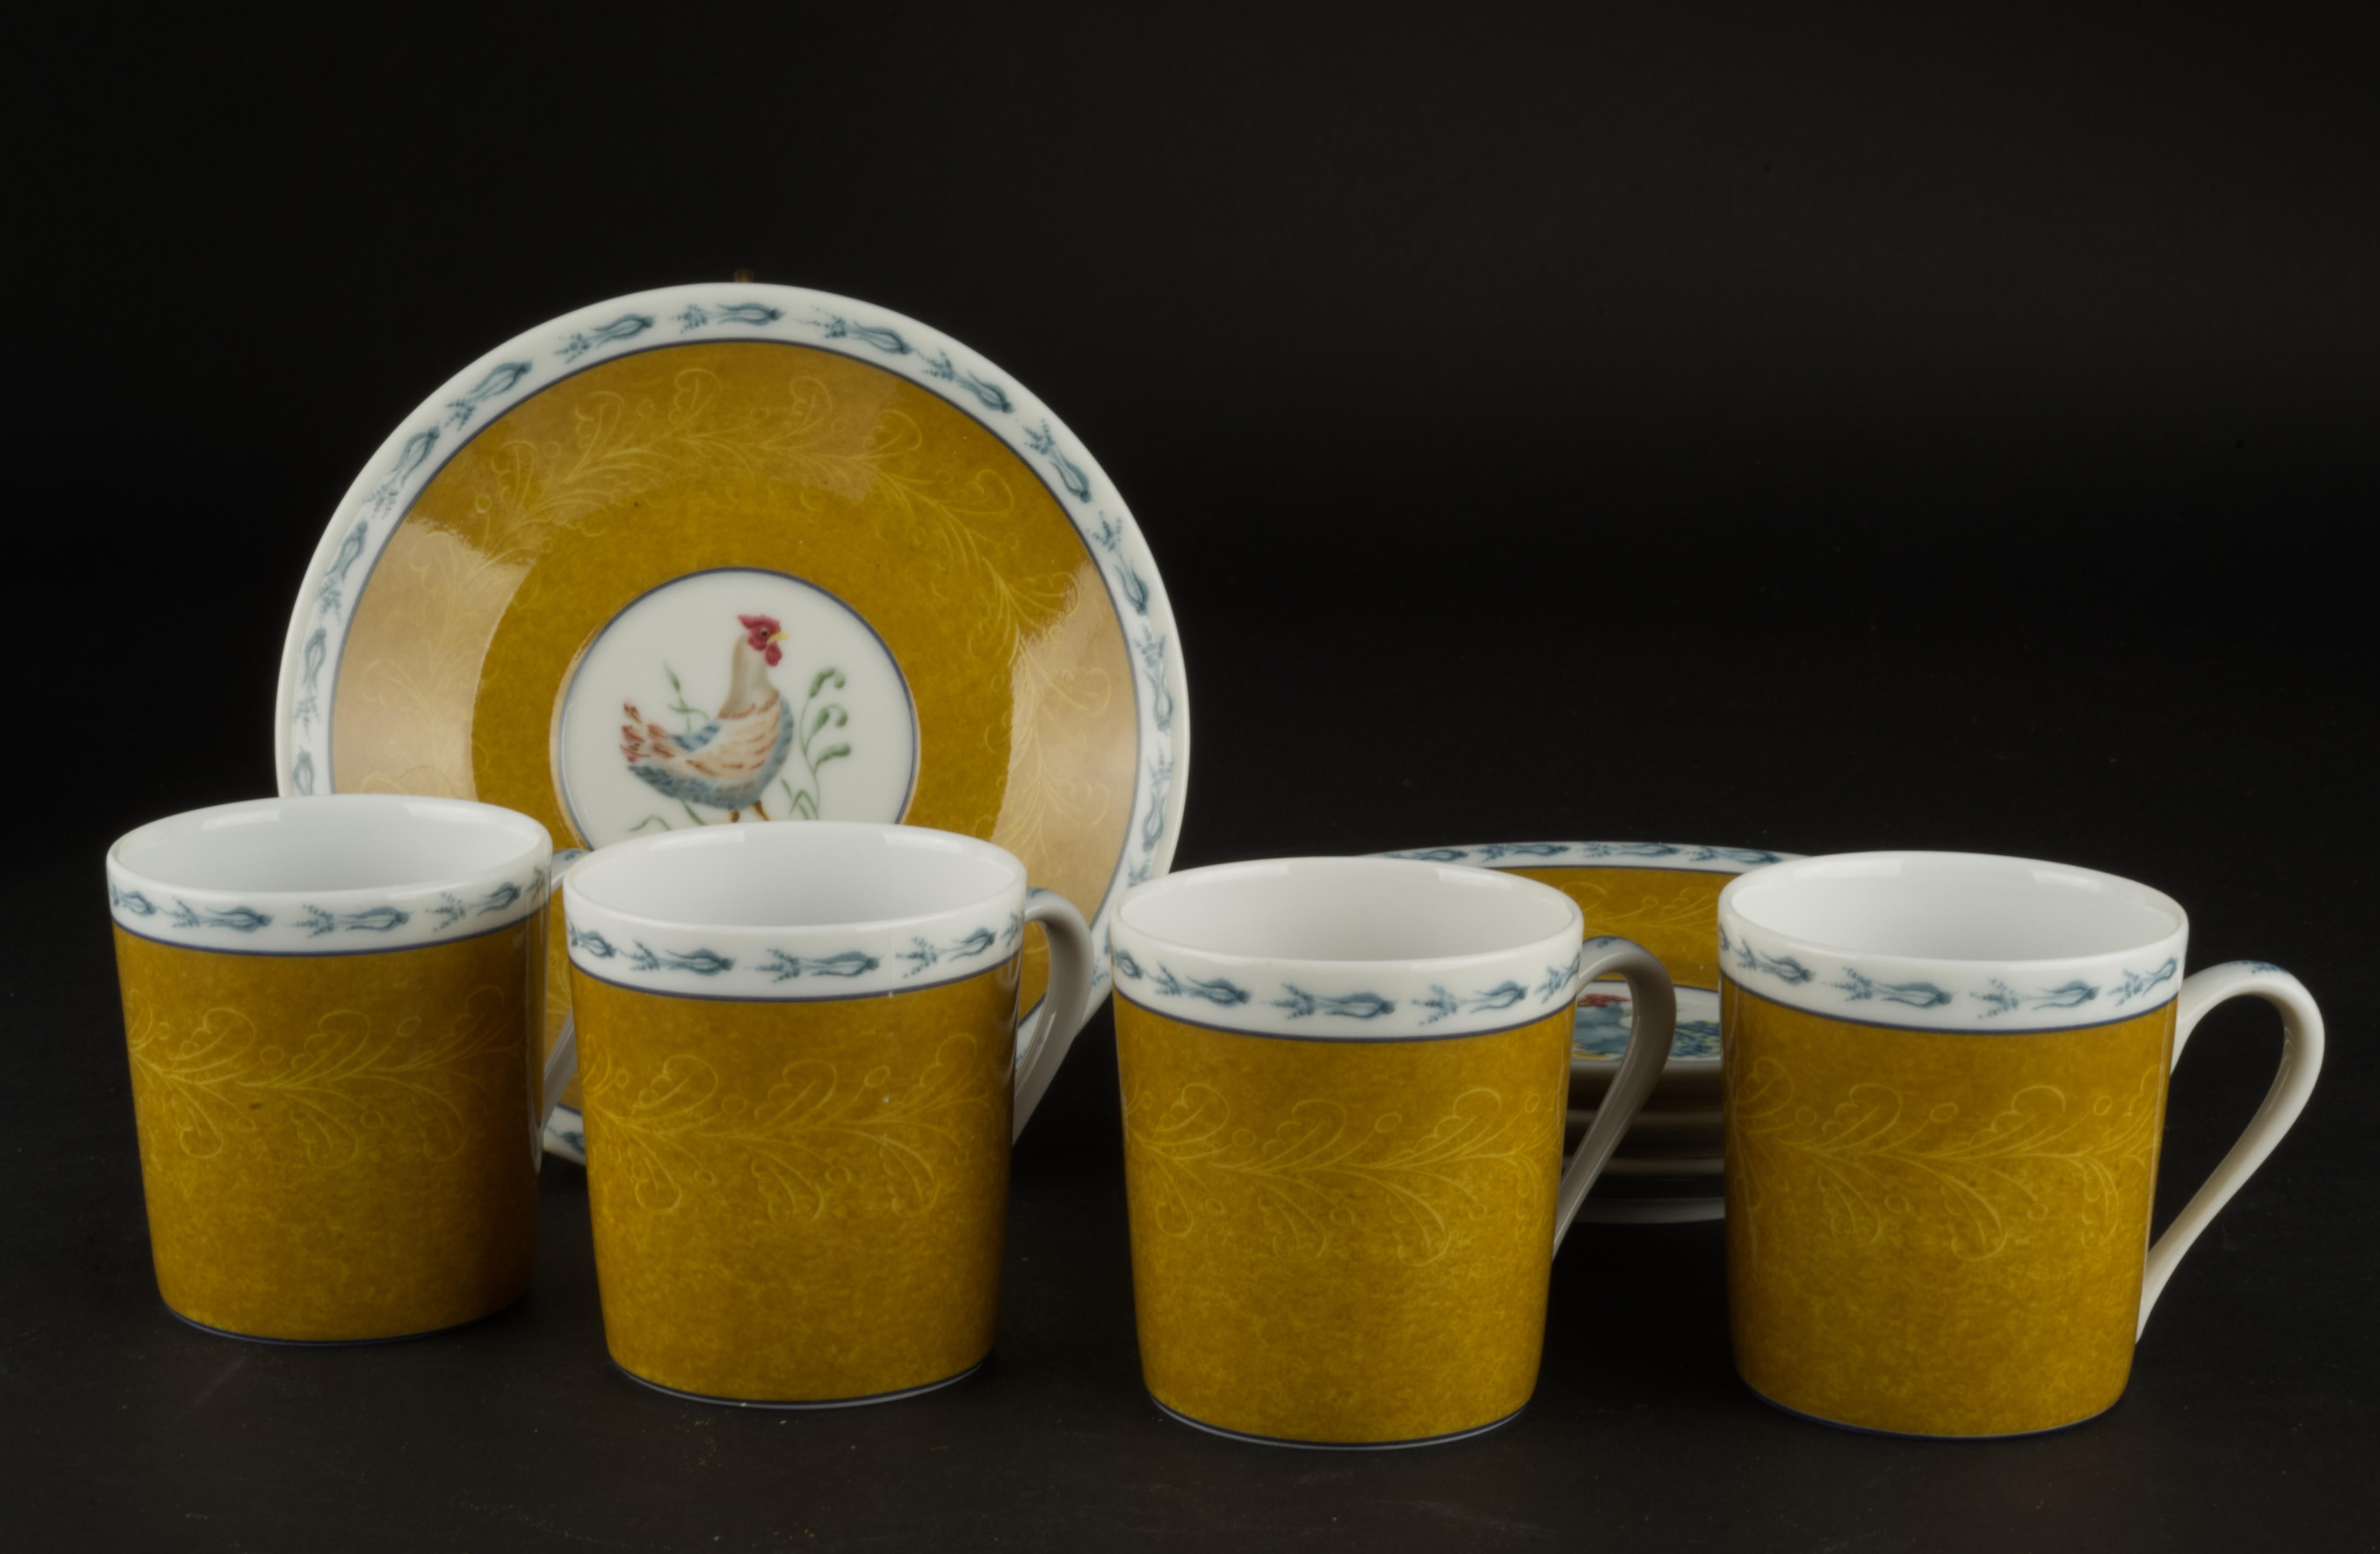 French Basse Cour by Pierre Frey set of 4 Demitasse Cups and Saucers, Limoges Porcelain For Sale